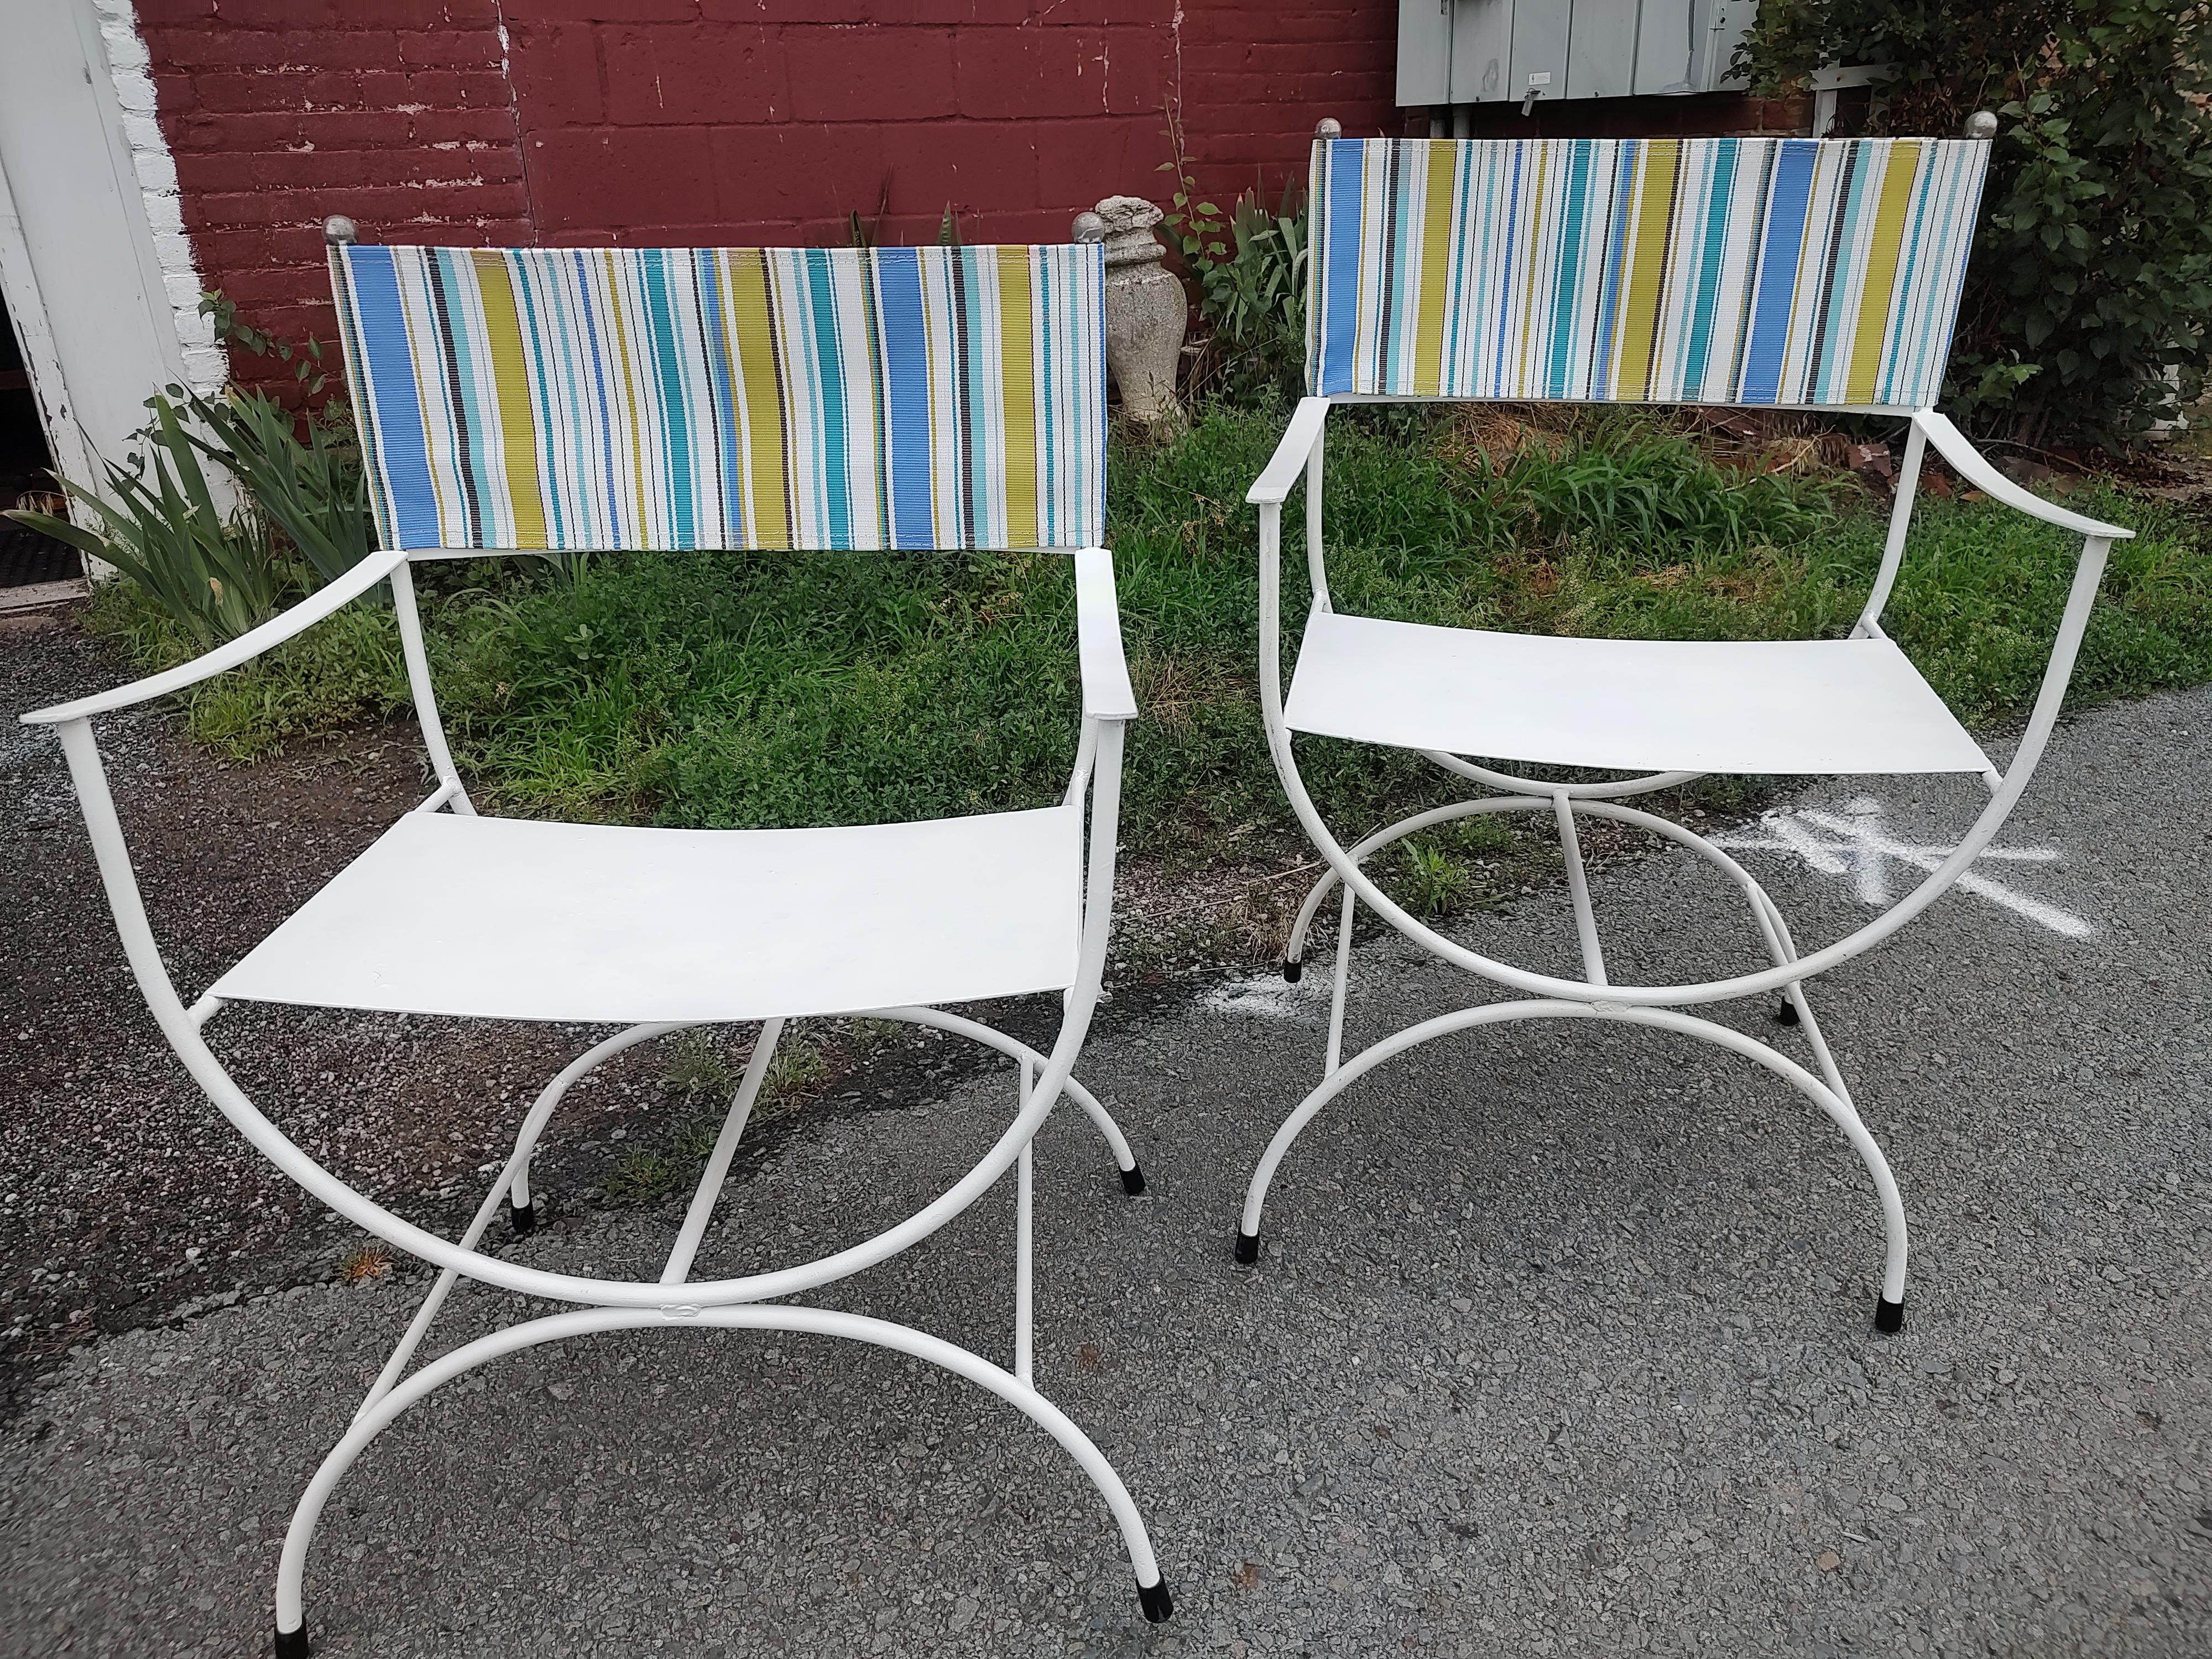 Pair of Mid Century Modern Patio Directors Chairs with Sunbrella Backs 1960 For Sale 4